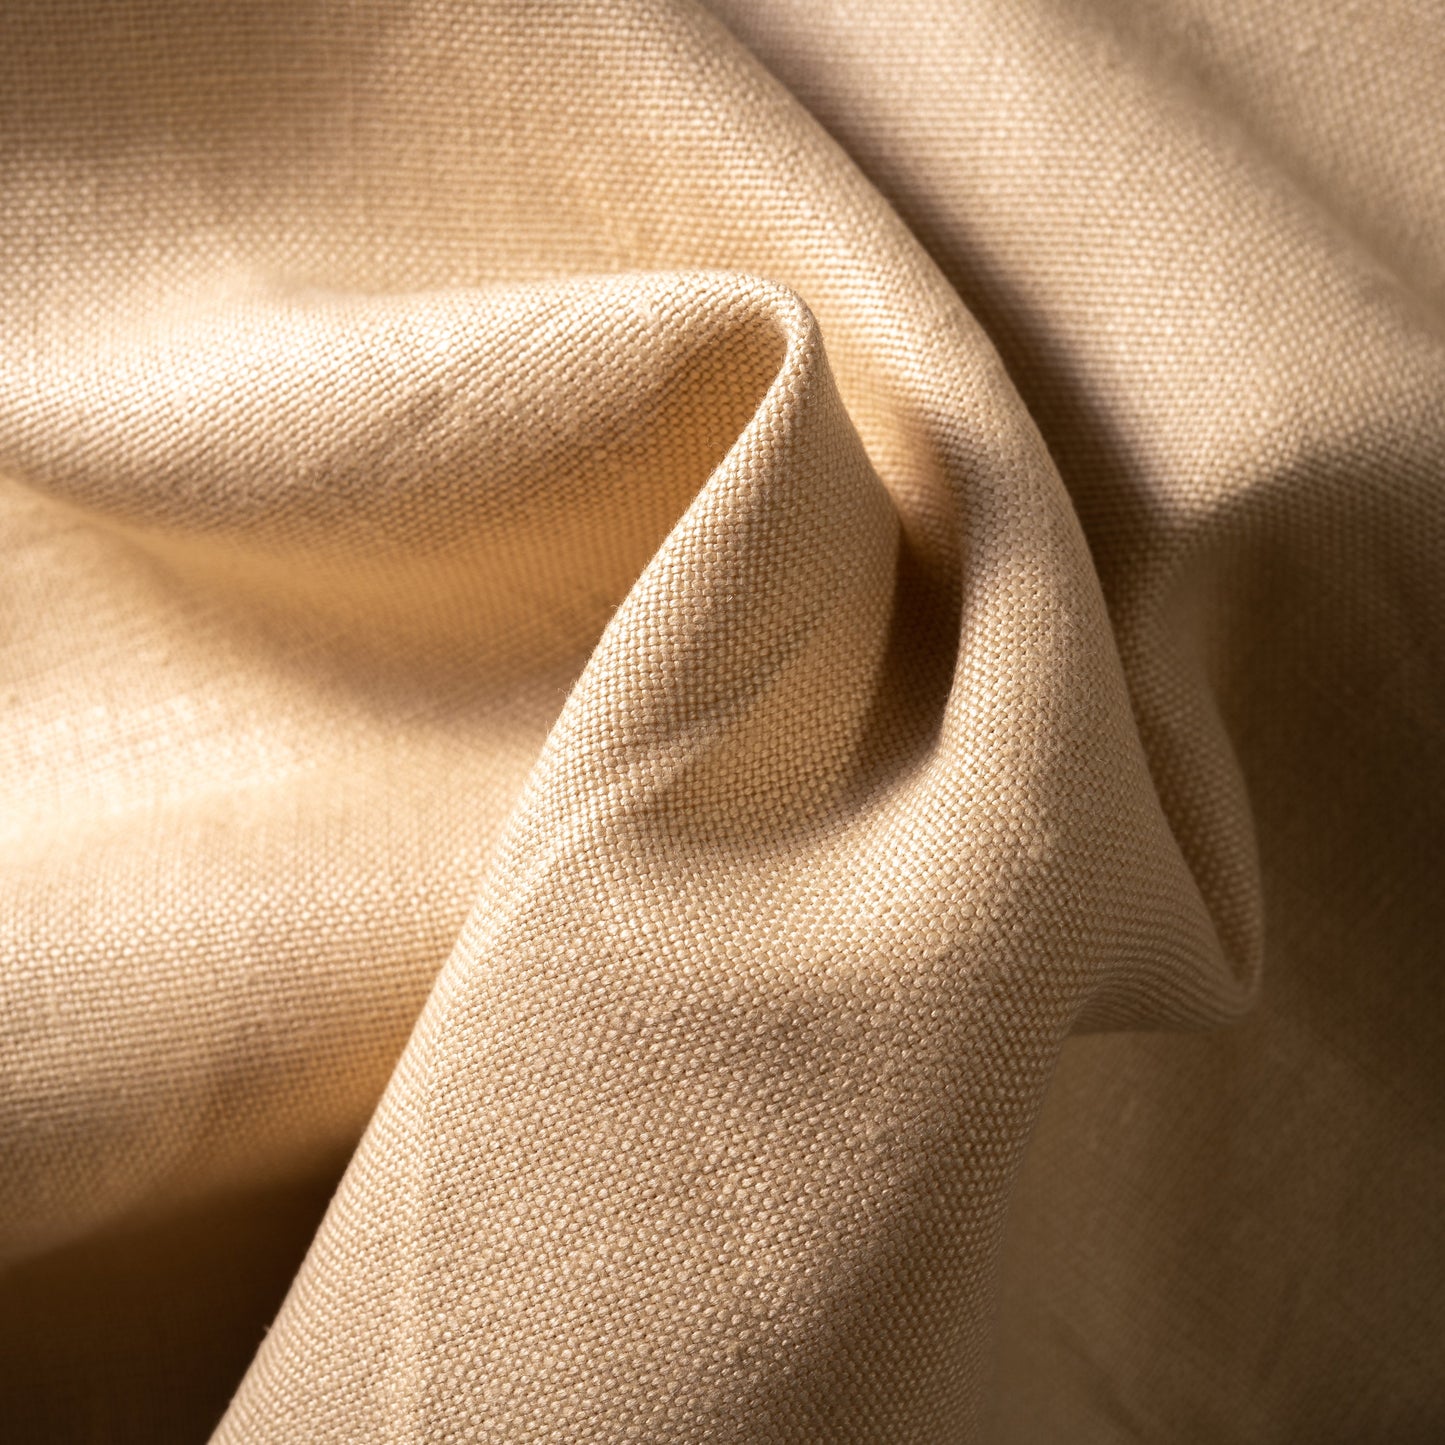 12 oz/sq yard 100% Upholstery/ Slipcover Weight Linen in Cashew